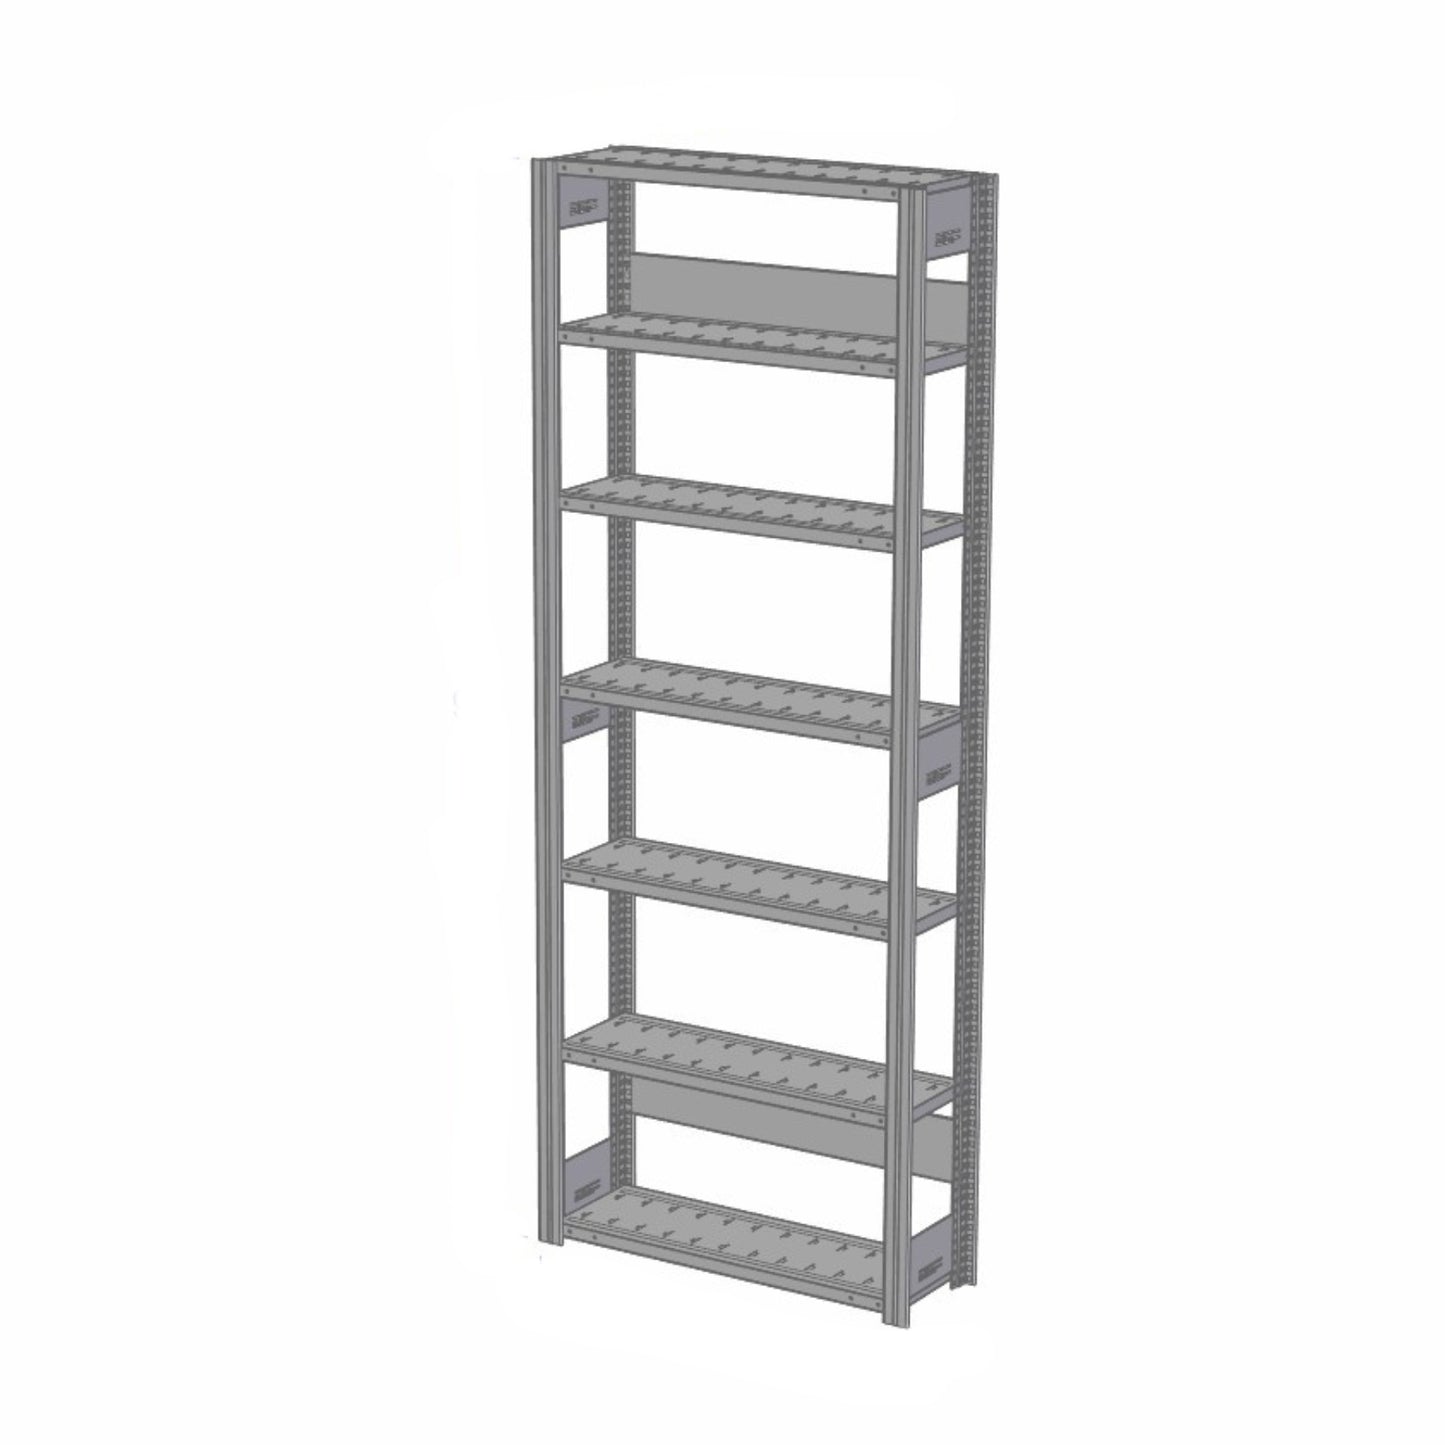 Shelving system 75 height x 36 width x 12 depth | Option: Open / Closed